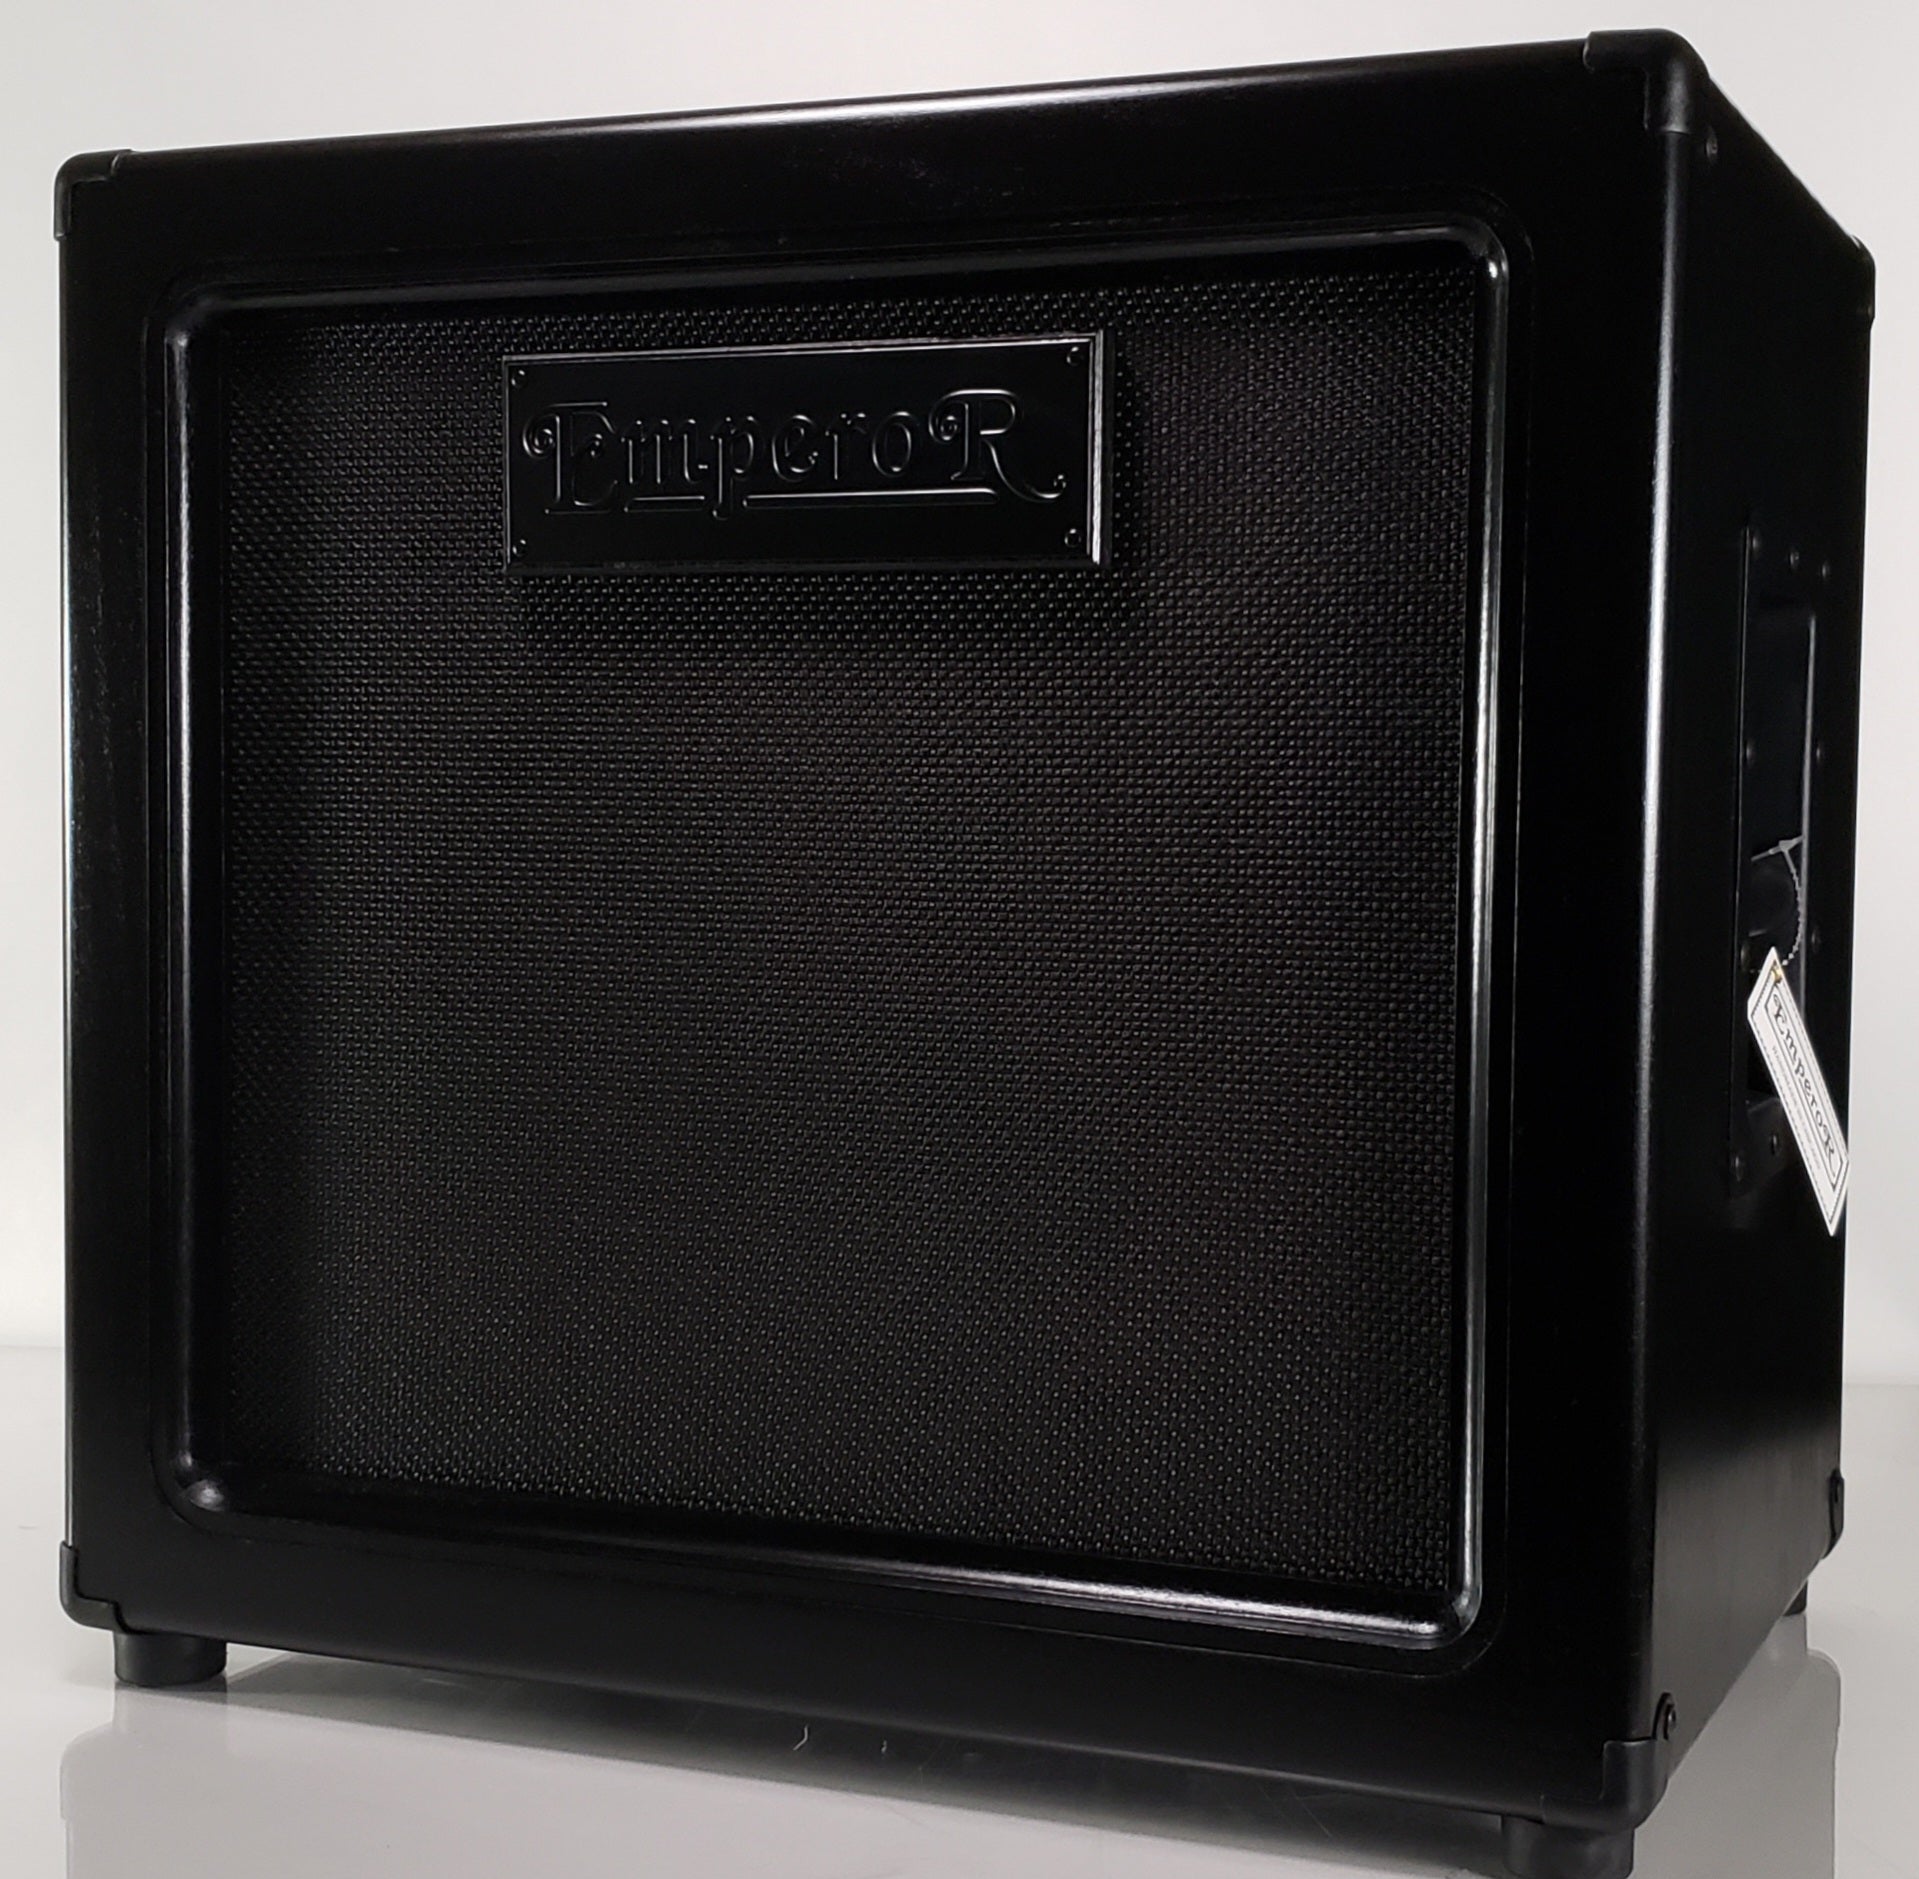 Blackened 1x12 RS Guitar Cabinet - Emperor Cabinets